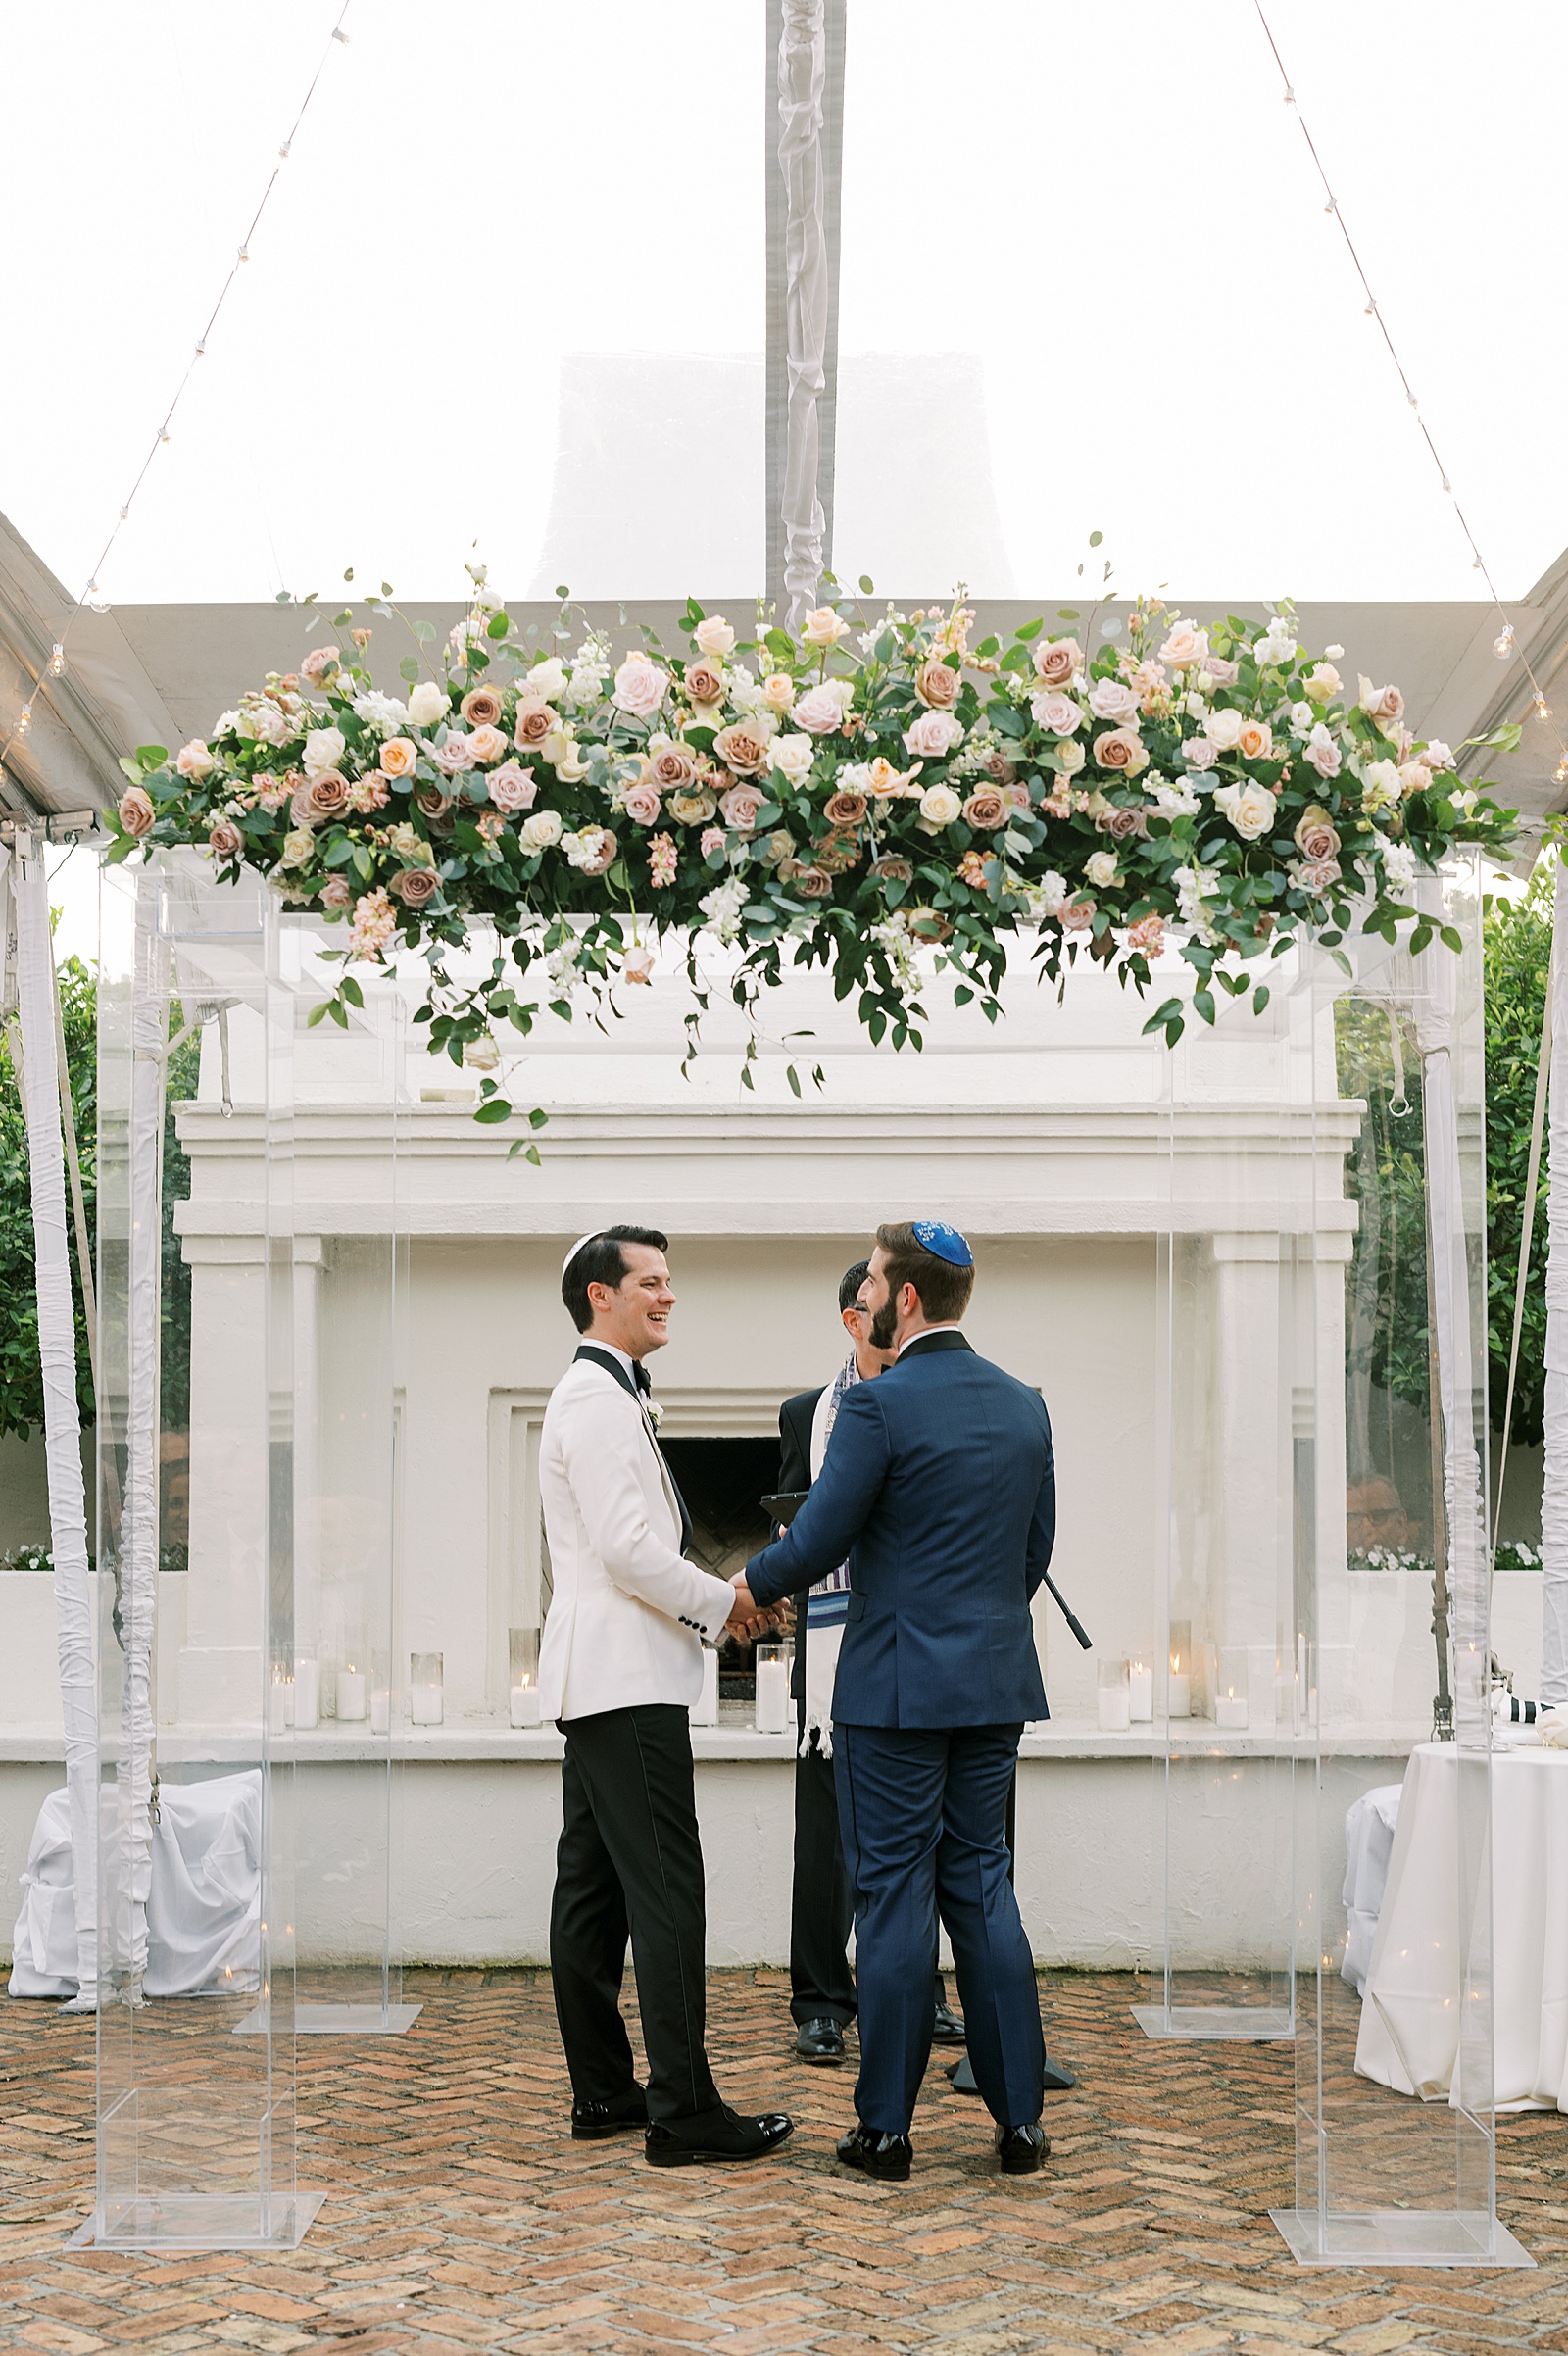 Two grooms turn to face each other under a floral chuppah in a courtyard wedding ceremony.